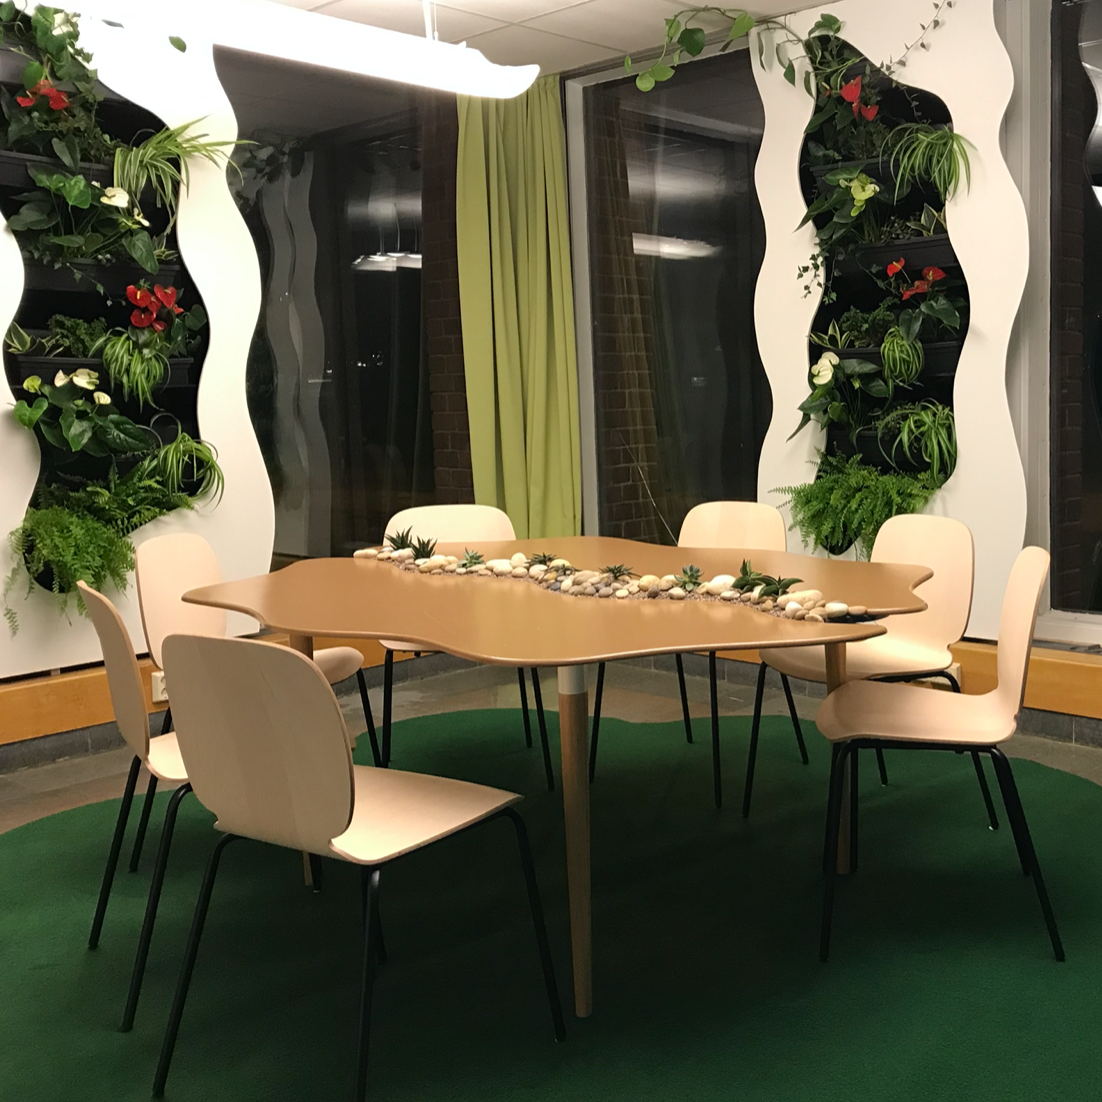 A conference room with a round and wave-shaped table as well as wave-shaped panels between the windows that houses living plants.